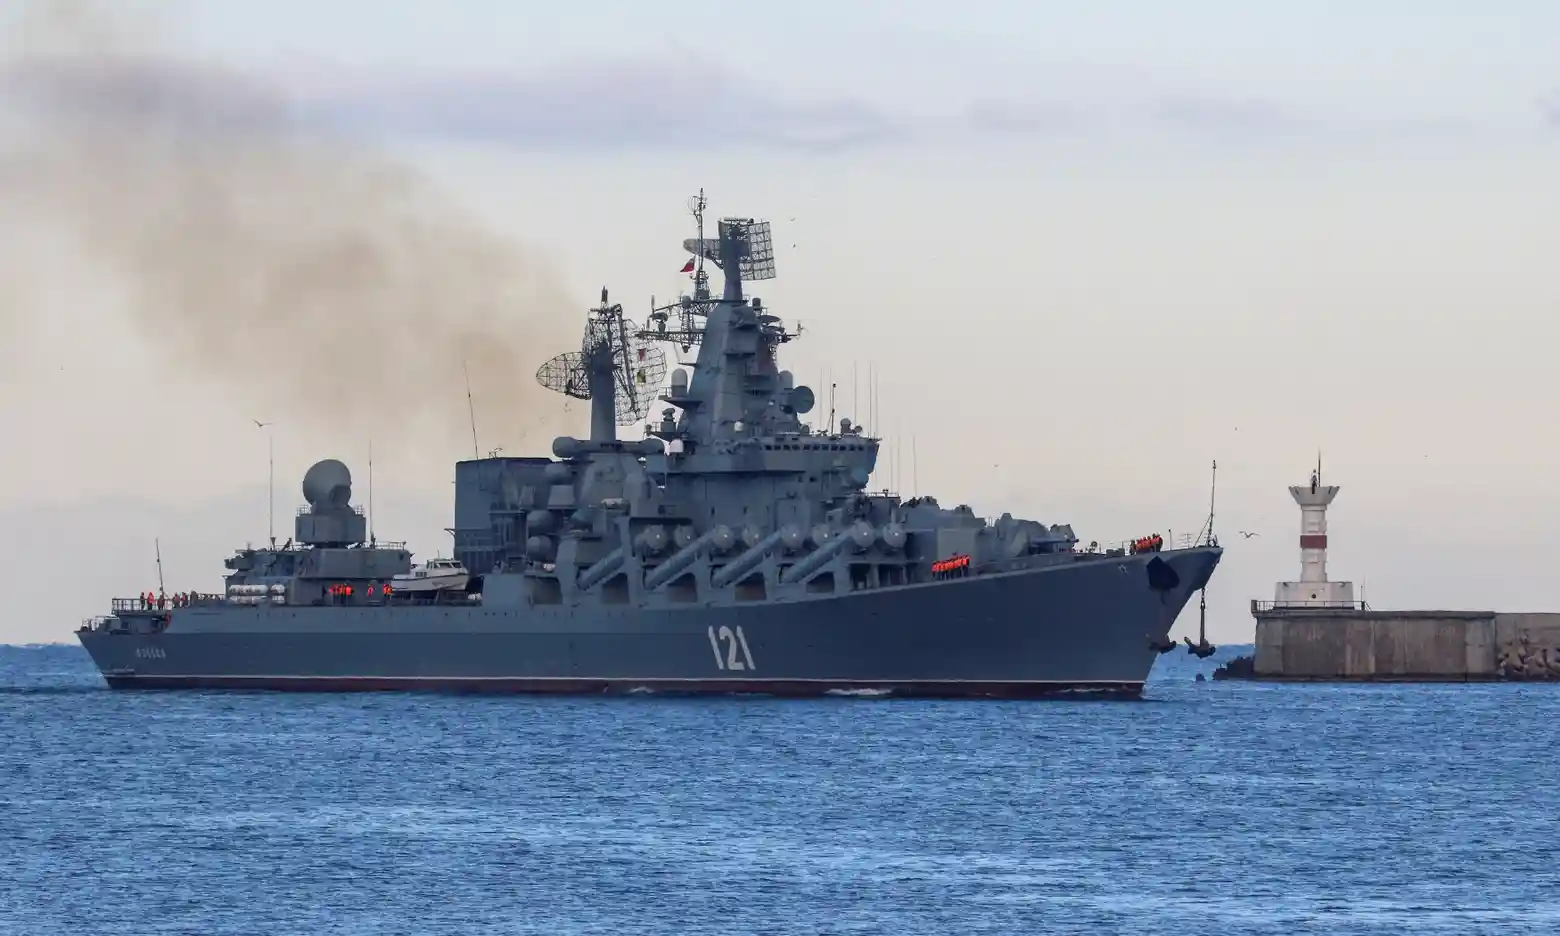 russia’s Black Sea flagship 'Moskva' was hit by Ukraine's Neptune anti-ship cruise missiles, Defense Express